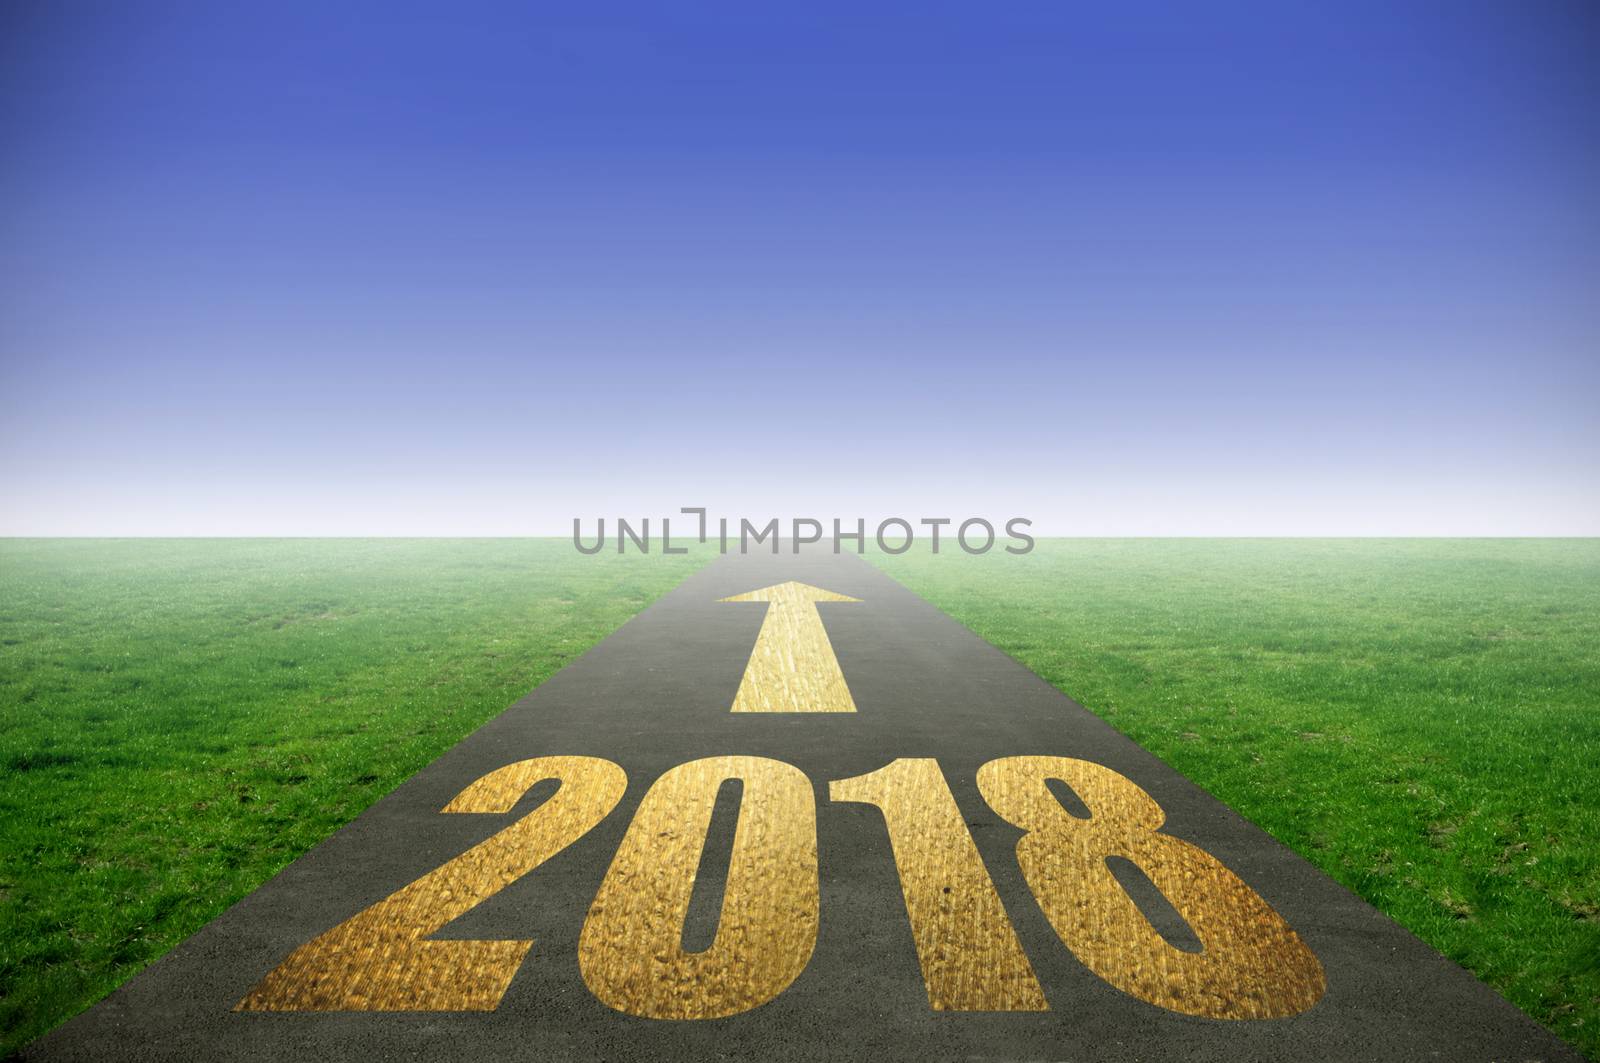 2018 printed in gold on road with green grass on each side